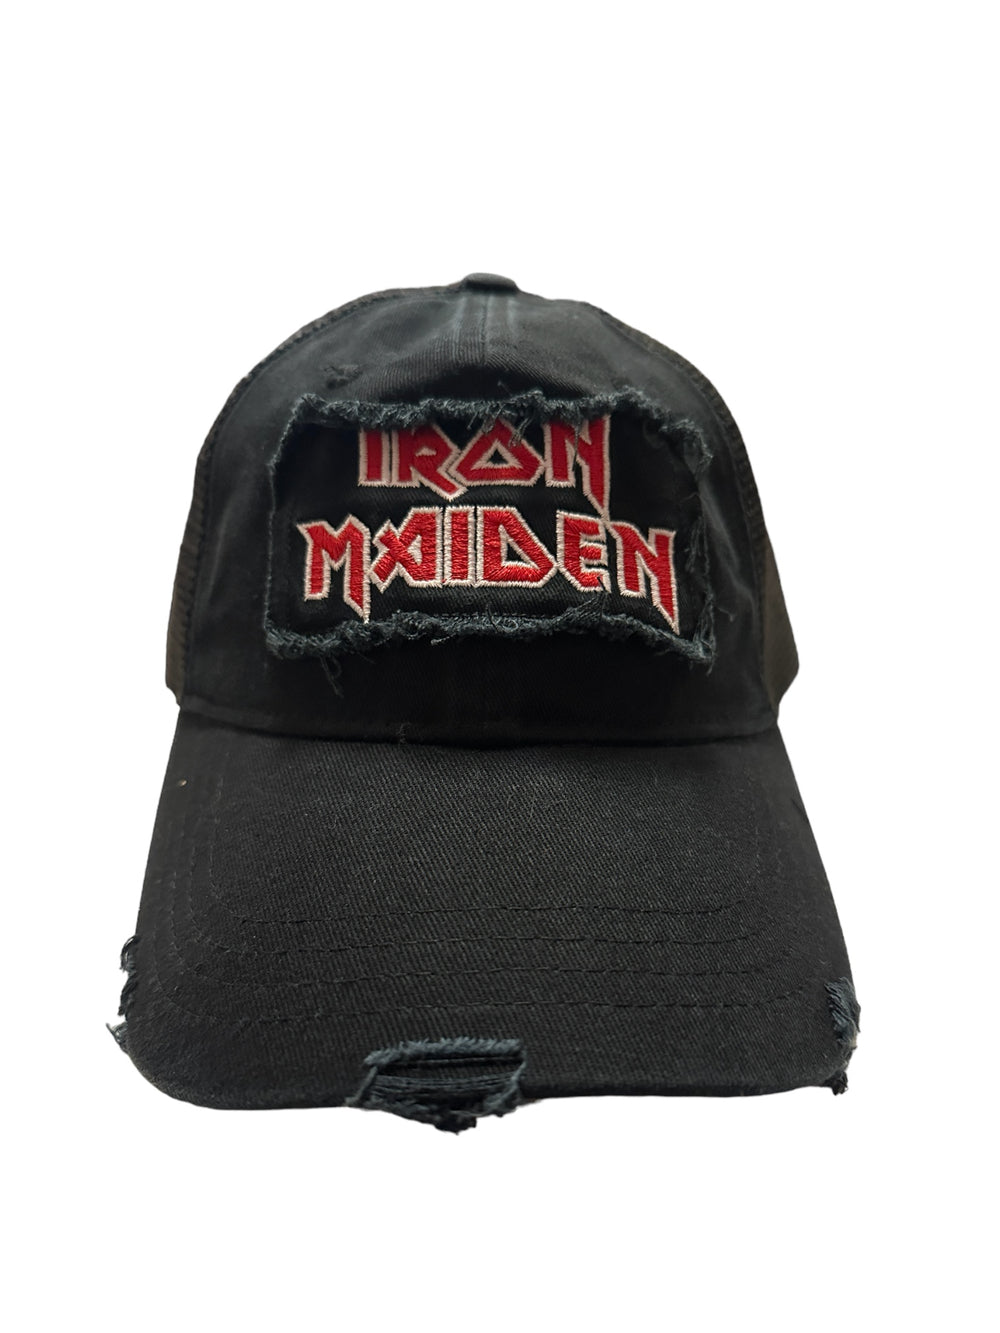 Iron Maiden Name Patch Distressed Mesh Official Embroidered Peak Cap Brand New